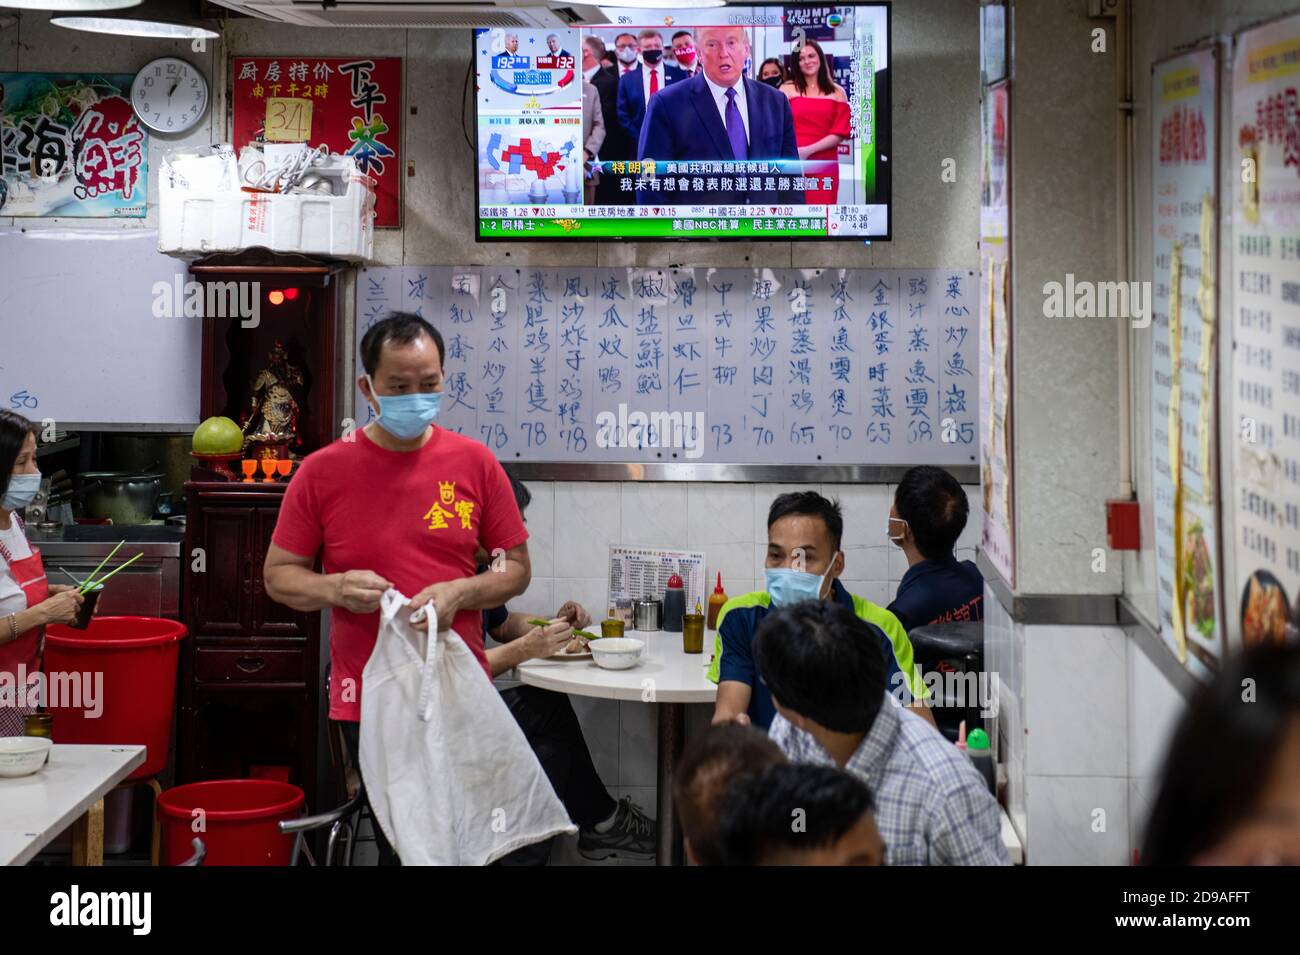 At a local restaurant, the Republican candidate Donald J. Trump appears on TV during news report about the US presidential election. Stock Photo